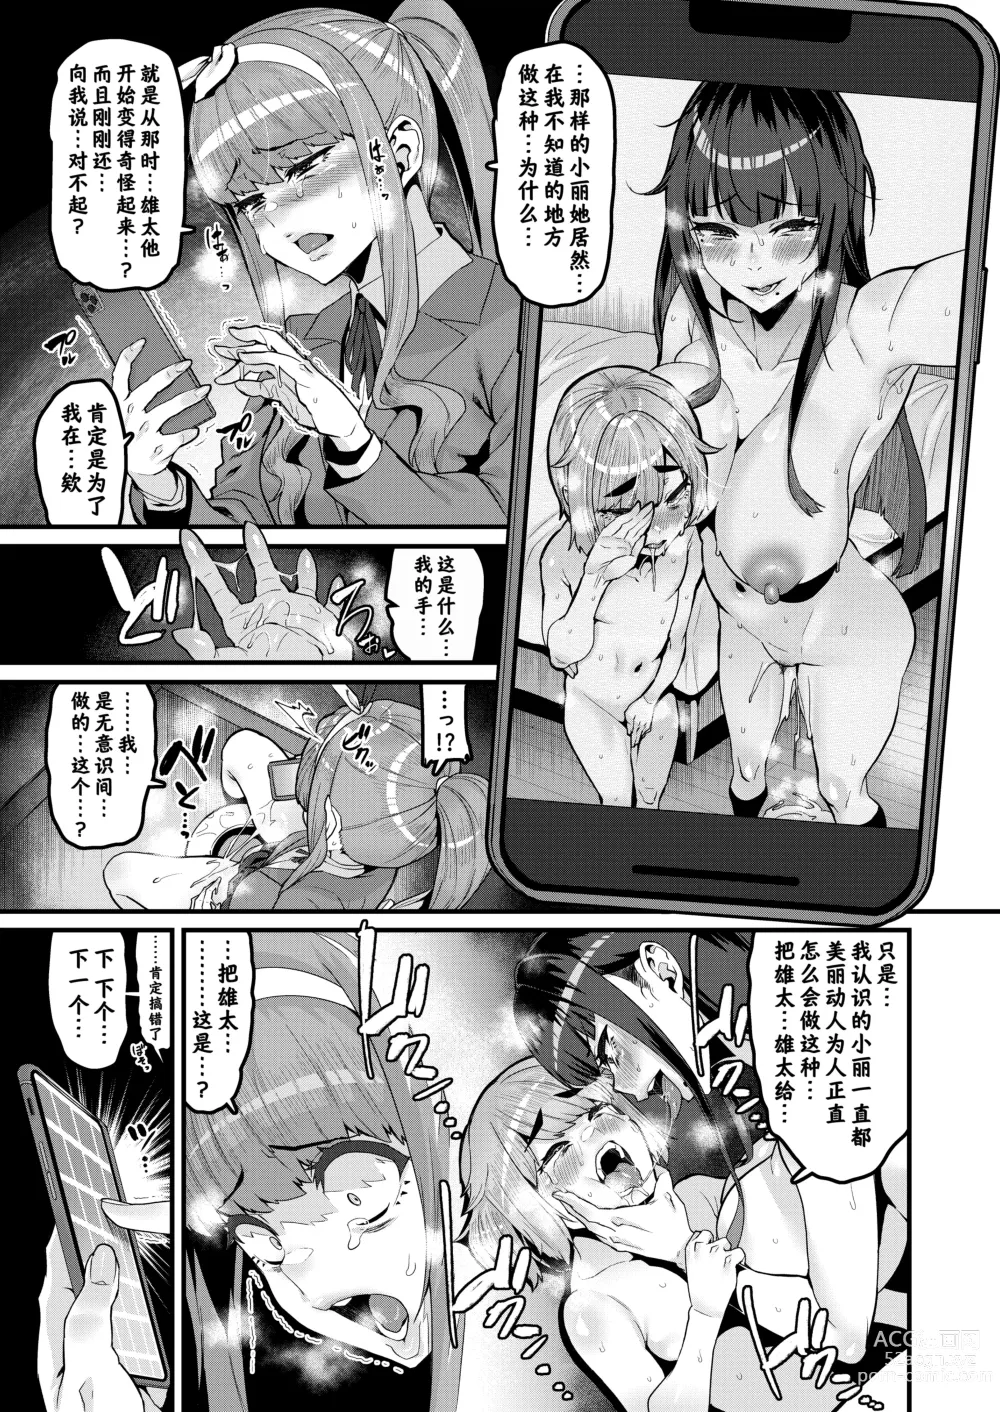 Page 14 of doujinshi 青梅竹马到此为止